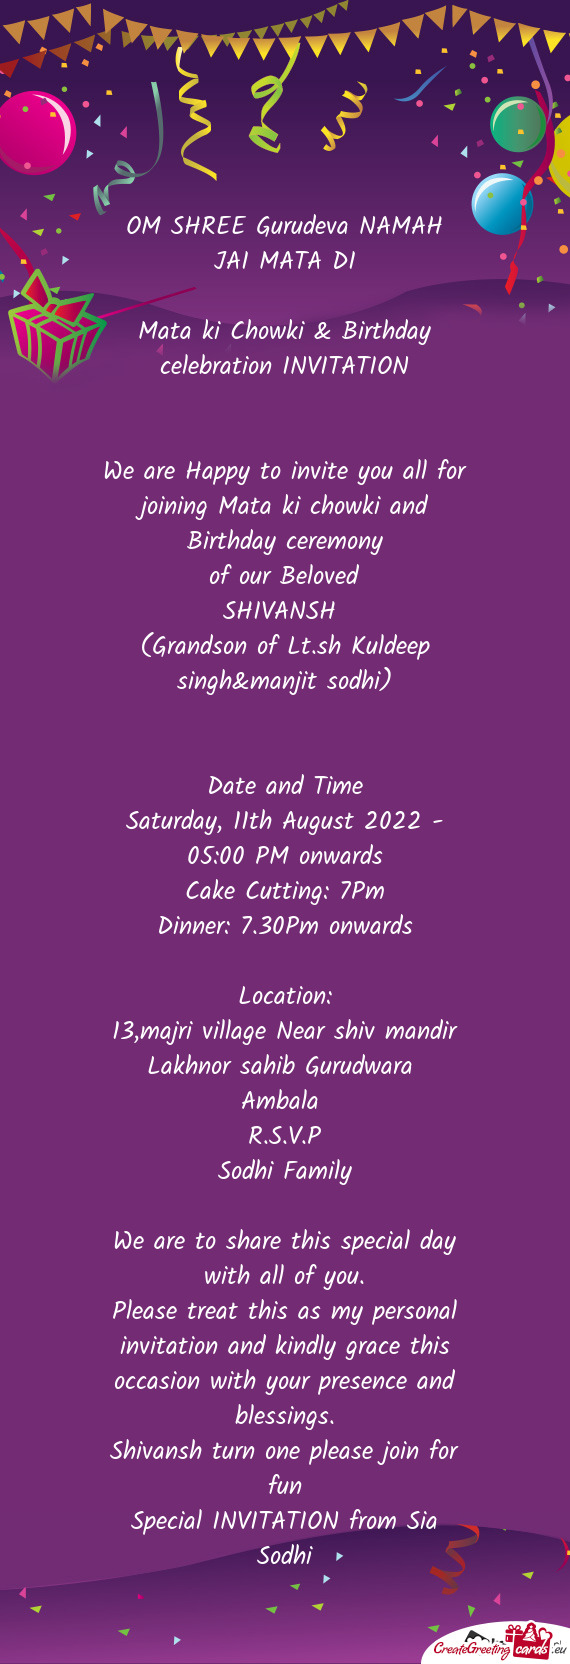 We are Happy to invite you all for joining Mata ki chowki and Birthday ceremony